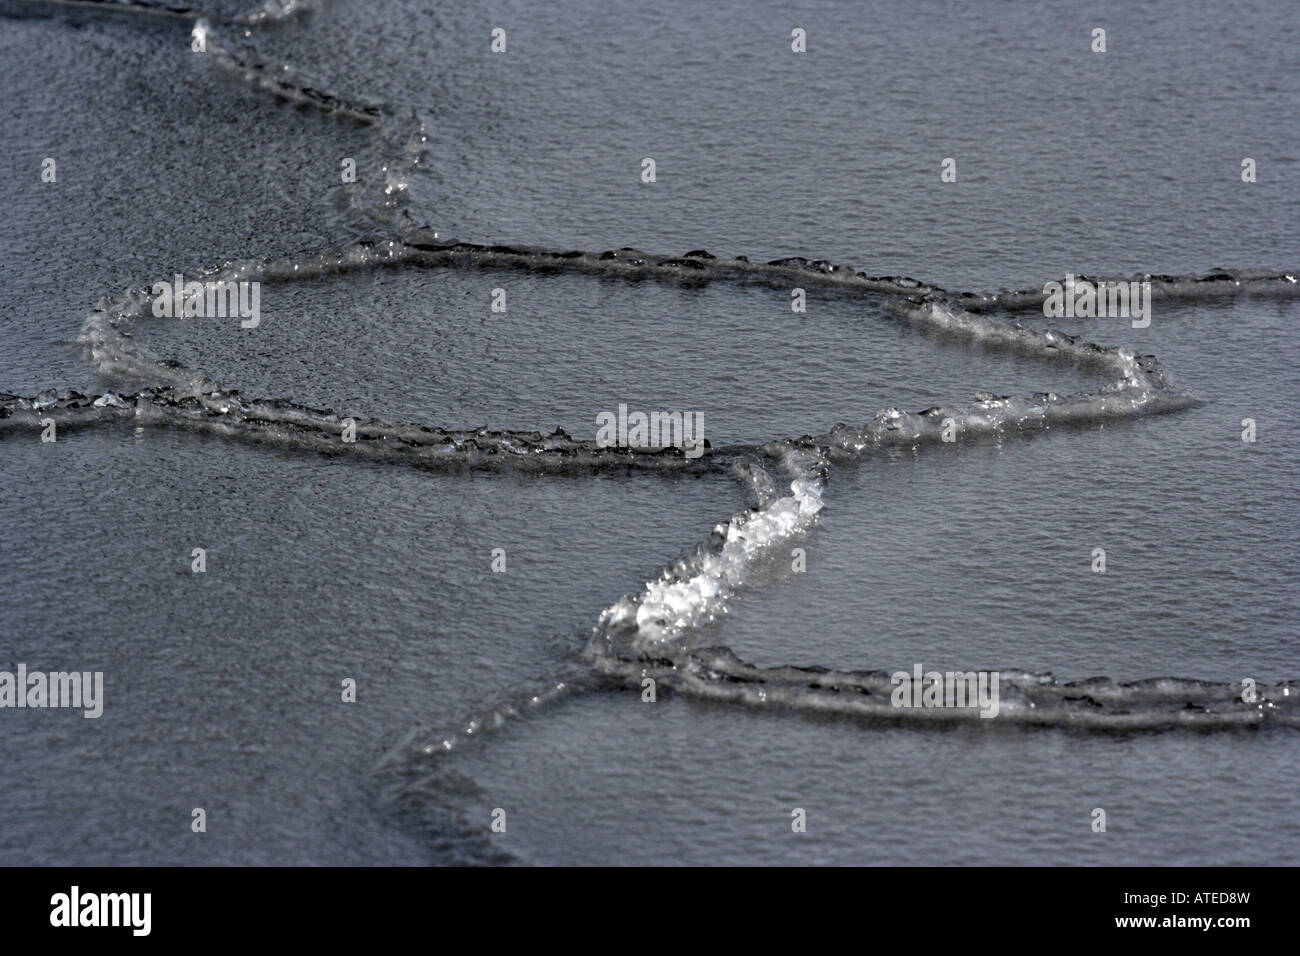 Ice formations on the surface of the sea Stock Photo